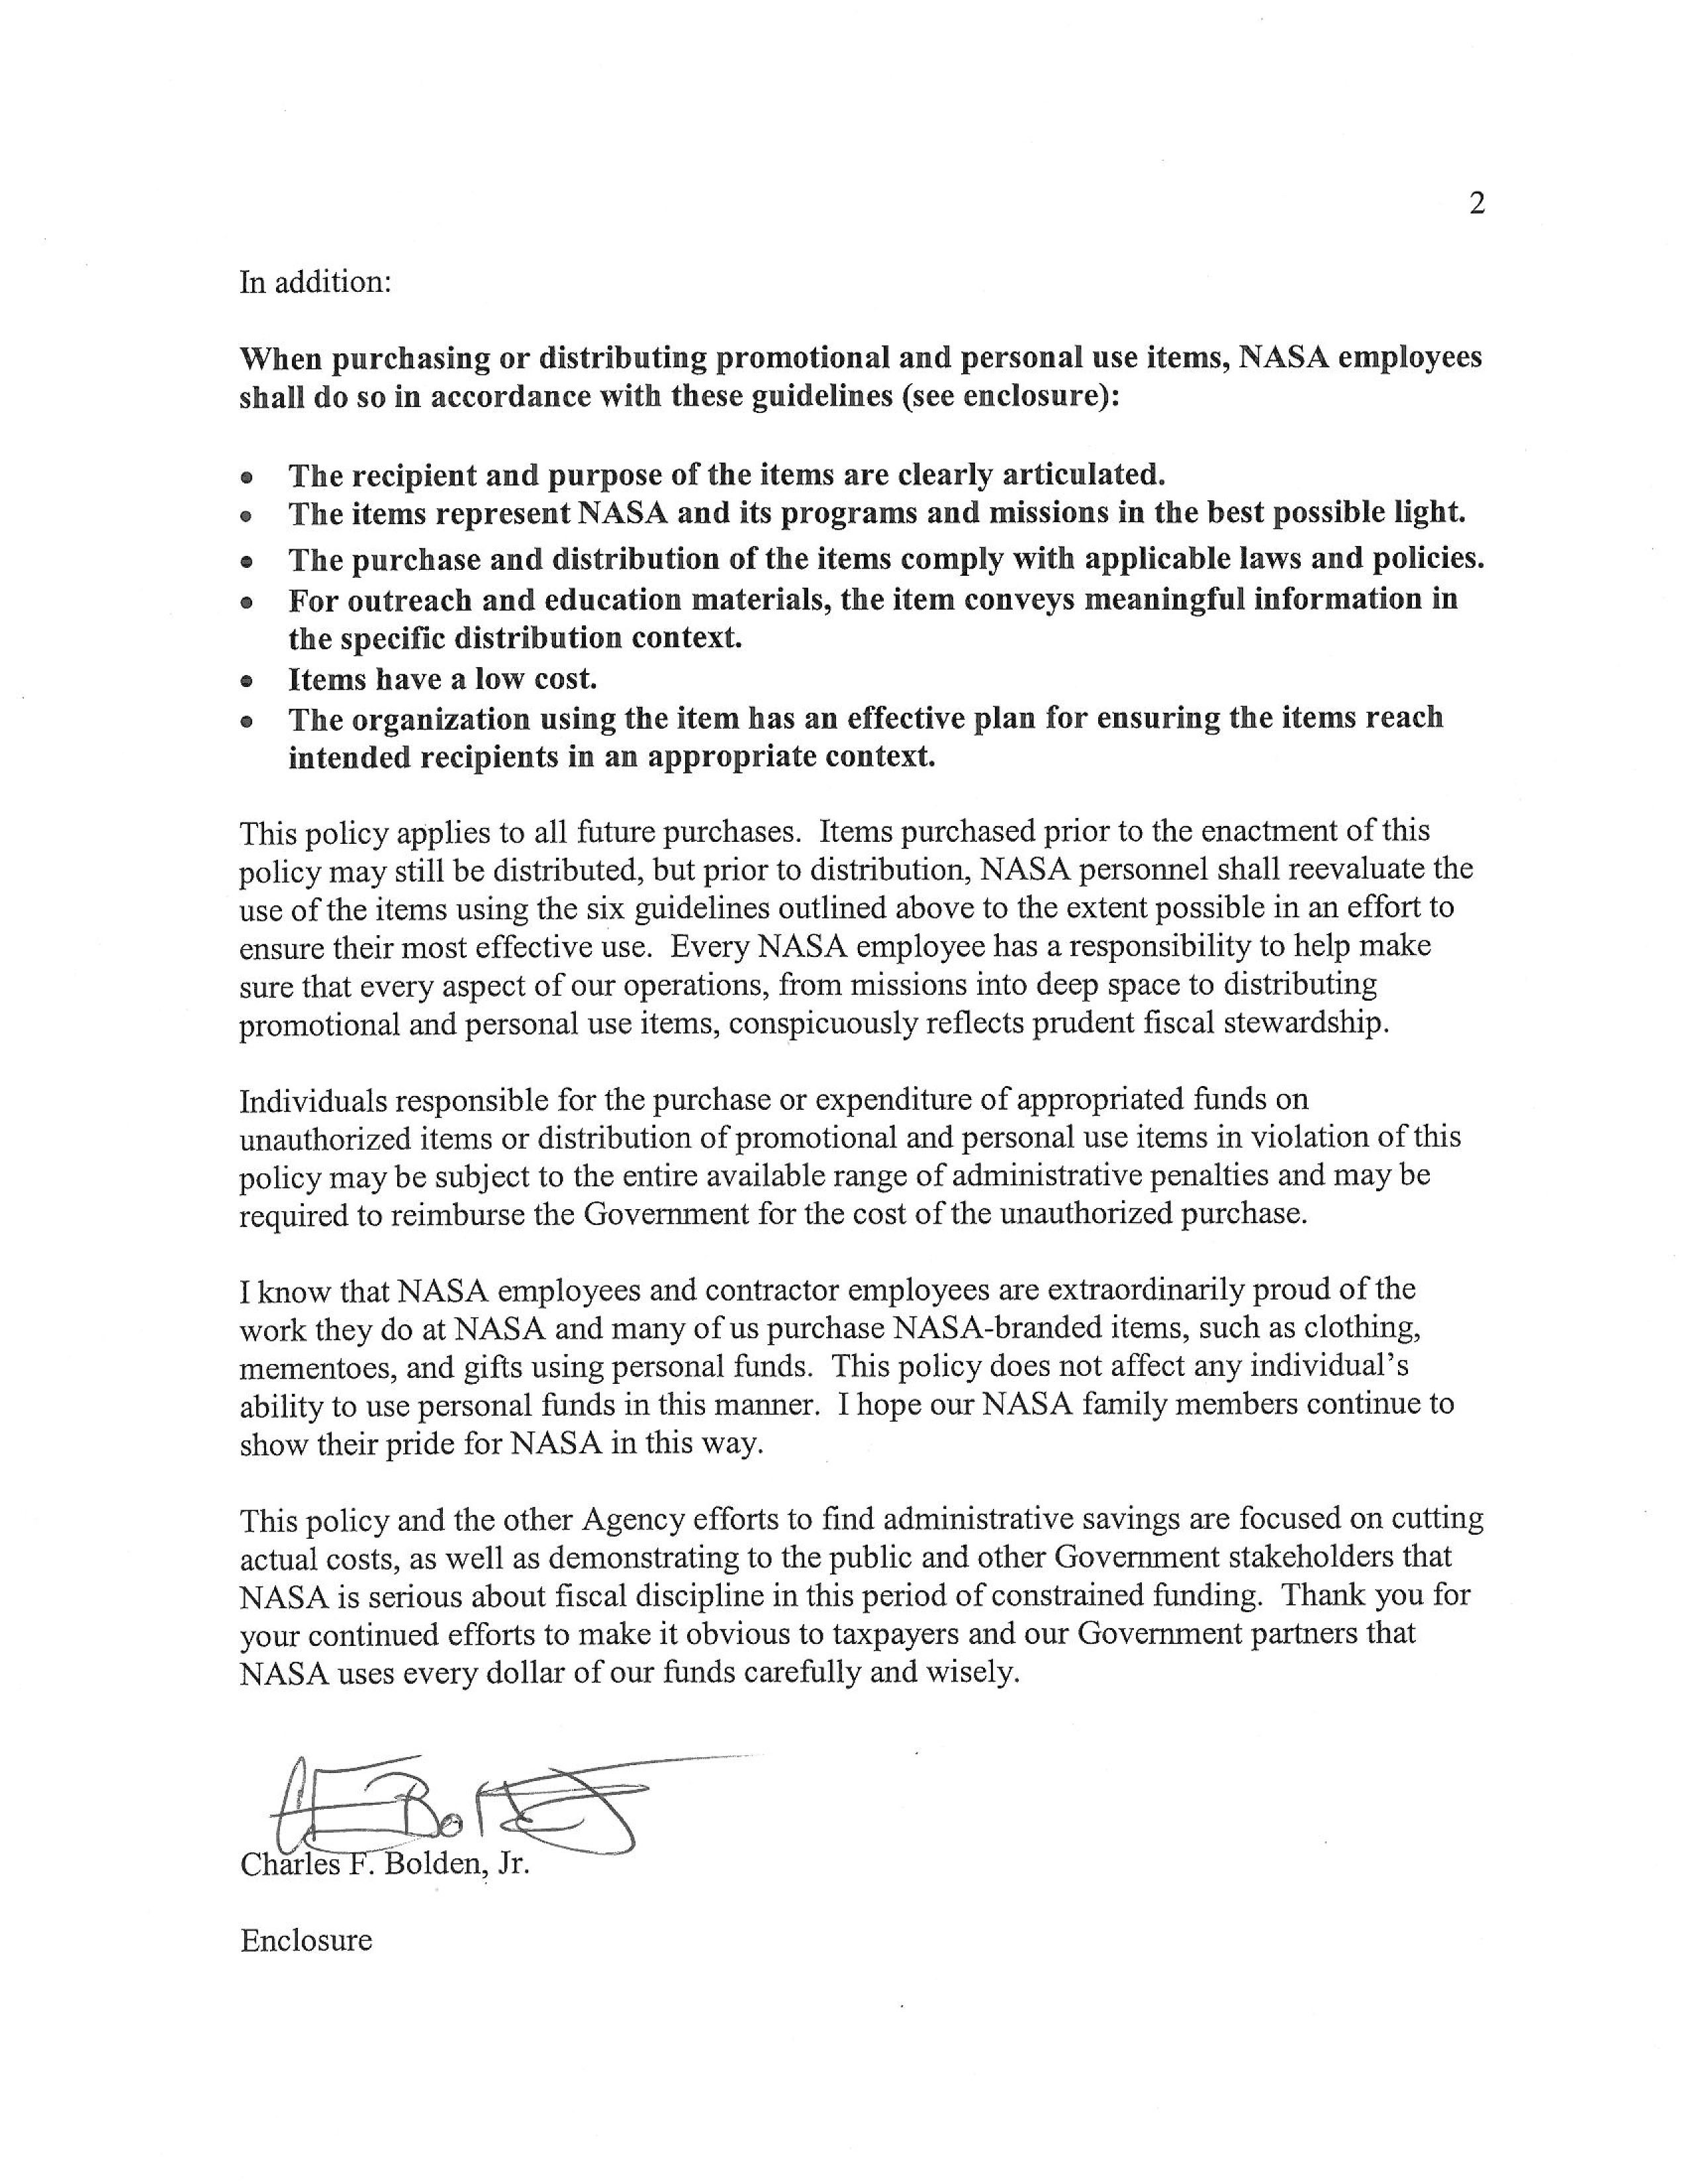 Image shows page 2 of the NASA Personal Property Disposal Procedural Requirements memo from the Office of the NASA Administrator dated April 16, 2012.